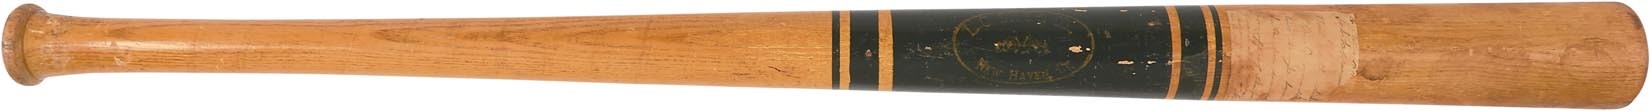 Early Baseball - 1880s L.C. Dole Ring Bat w/Earliest Known Use of the Term "Memorabilia" (Samuel M. Chase Collection)